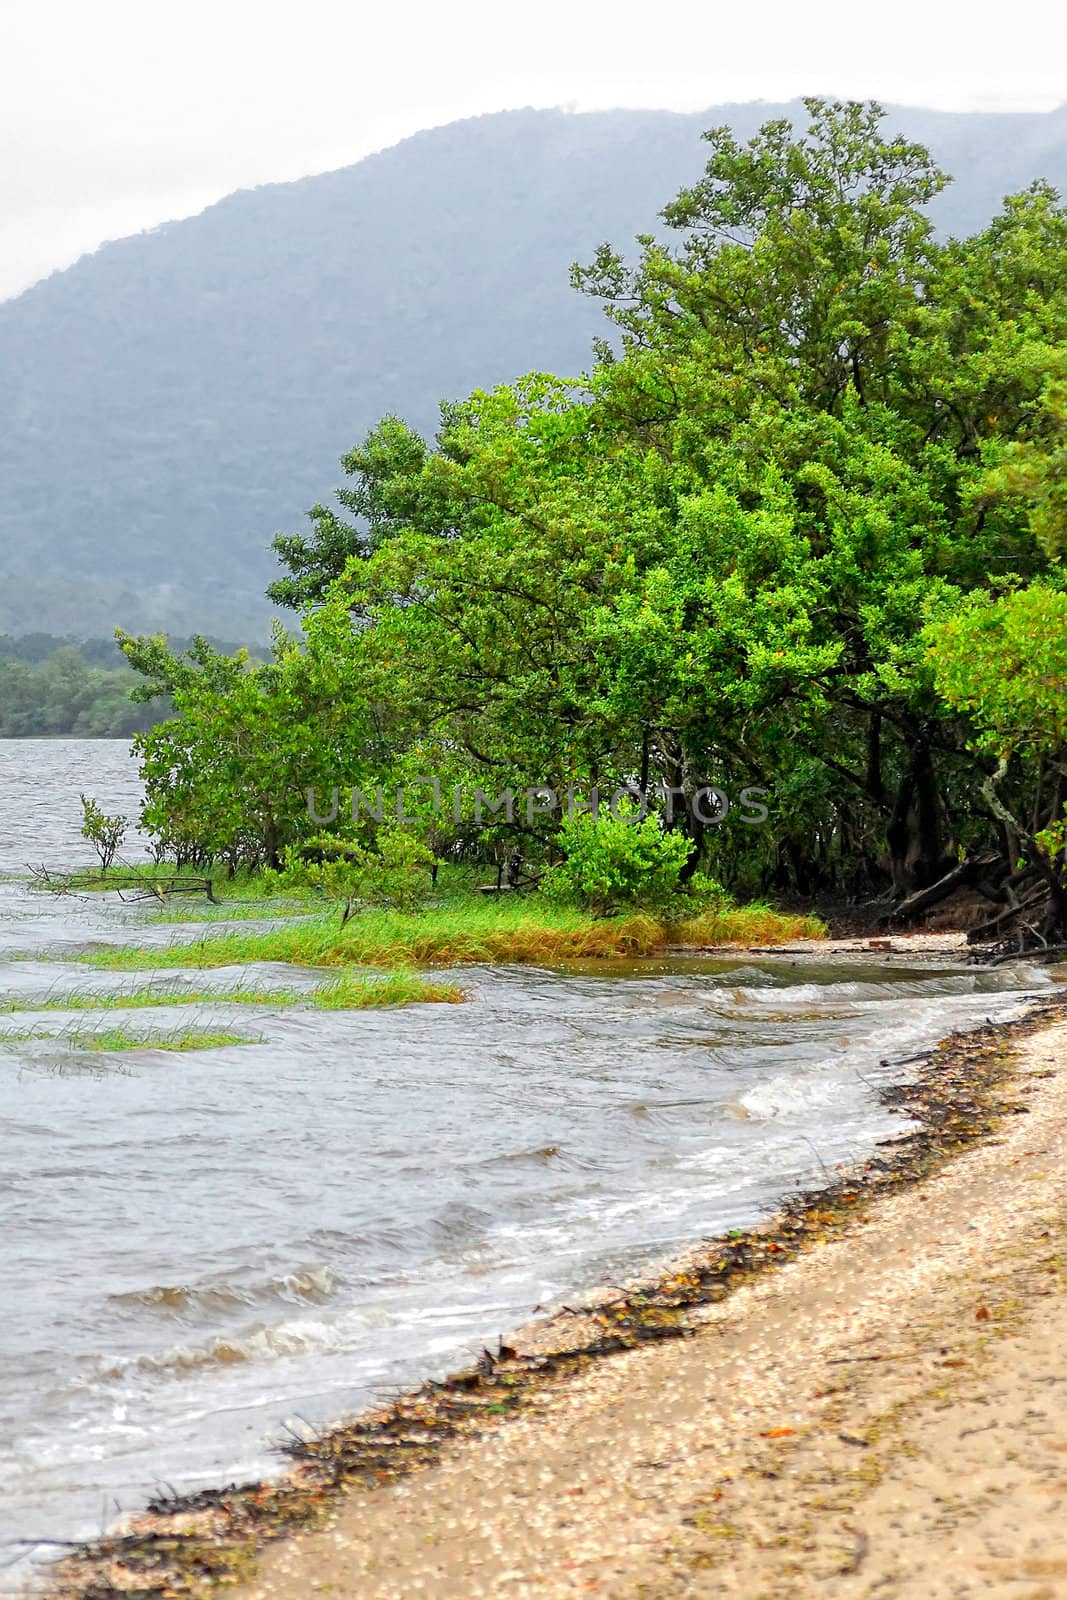 Mangrove is a vegetation of some estuarine beaches, typical in tropical and subtropical climates